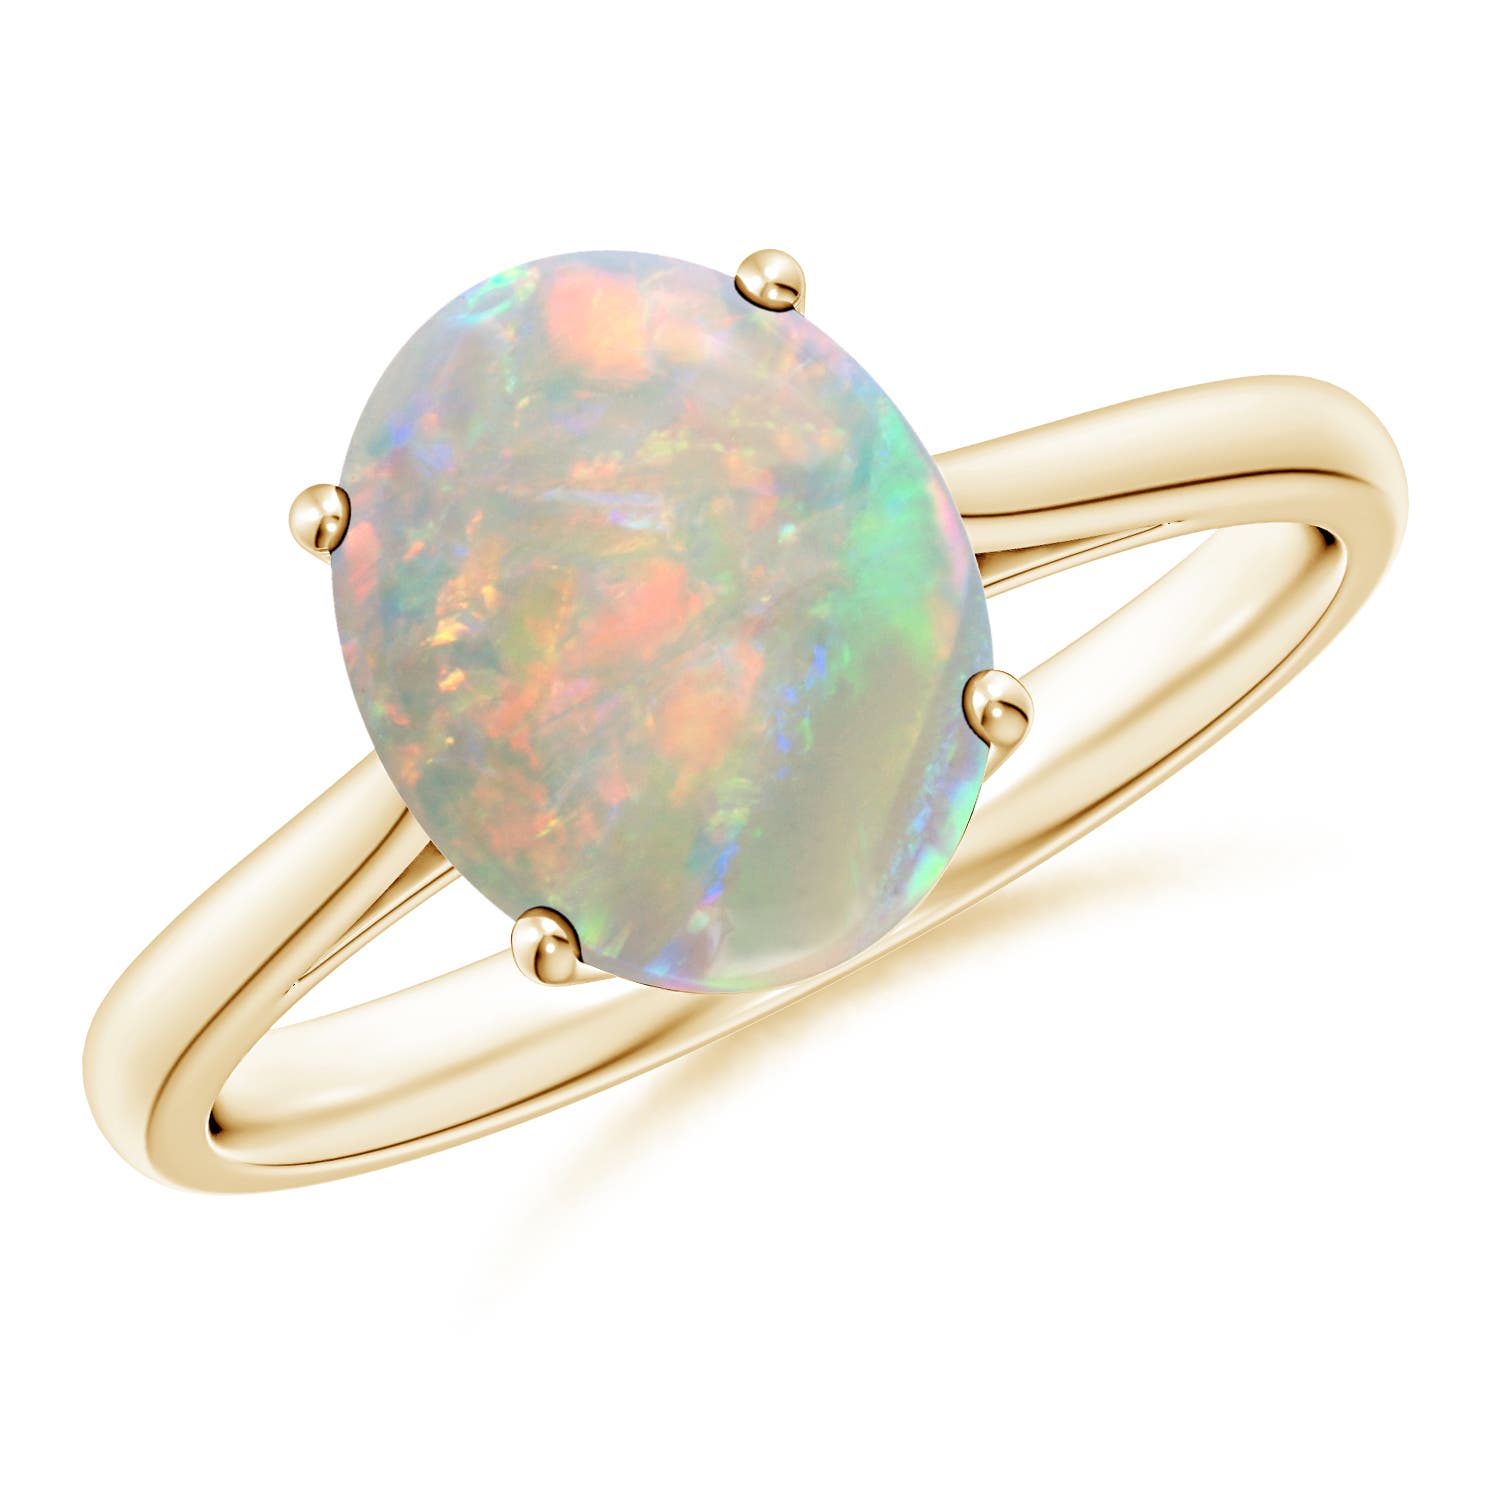 Shop Opal Jewelry with Unique Designs | Angara